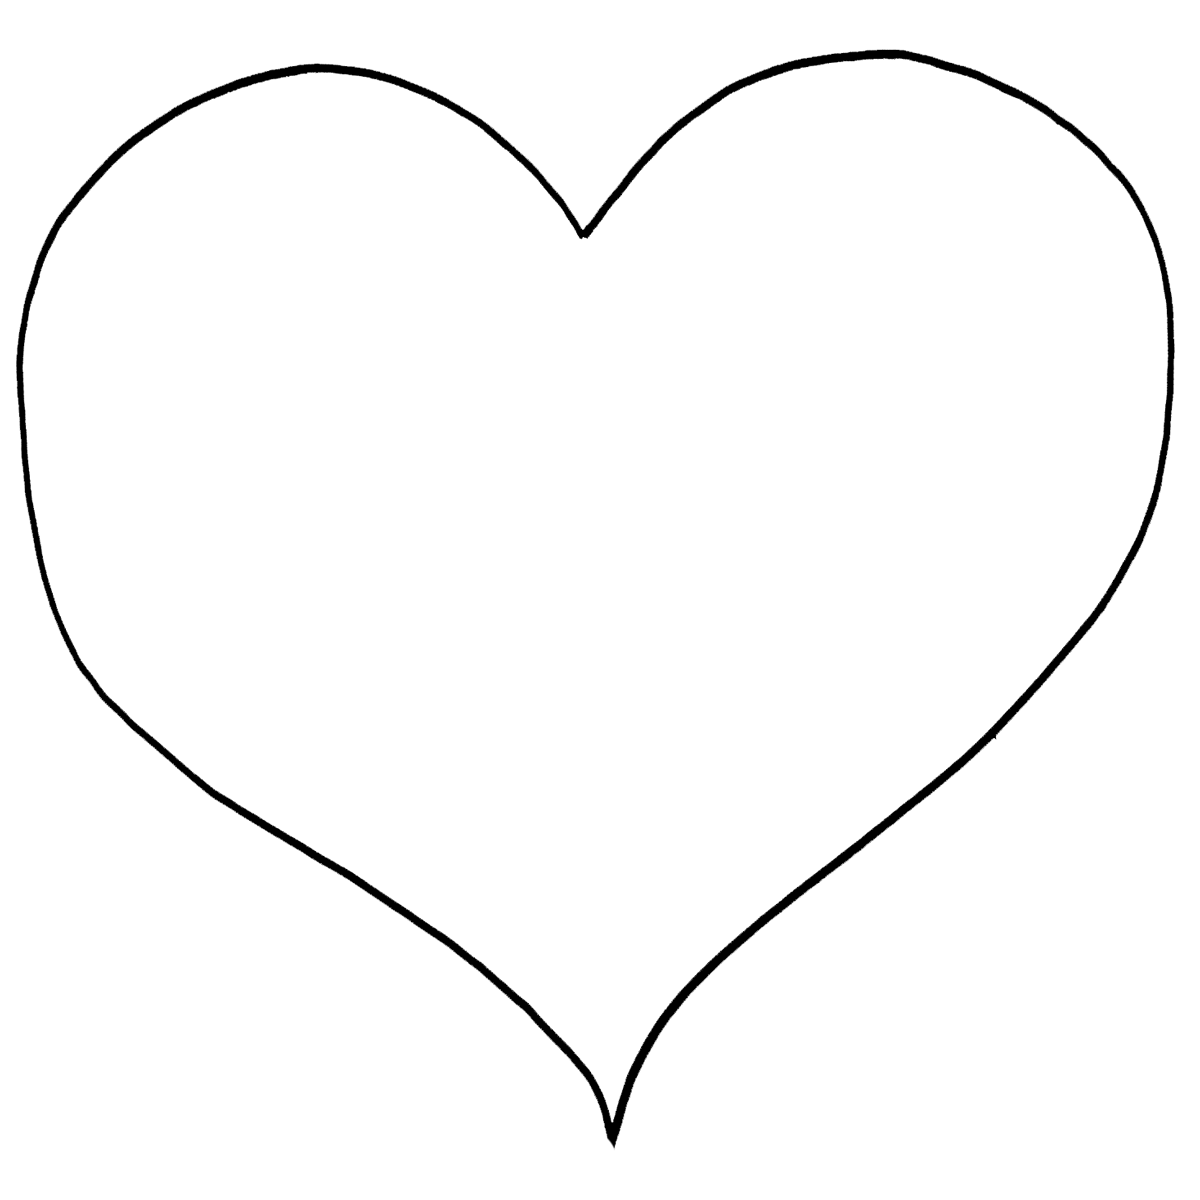 hearts coloring pictures free printable heart coloring pages for kids pictures coloring hearts 